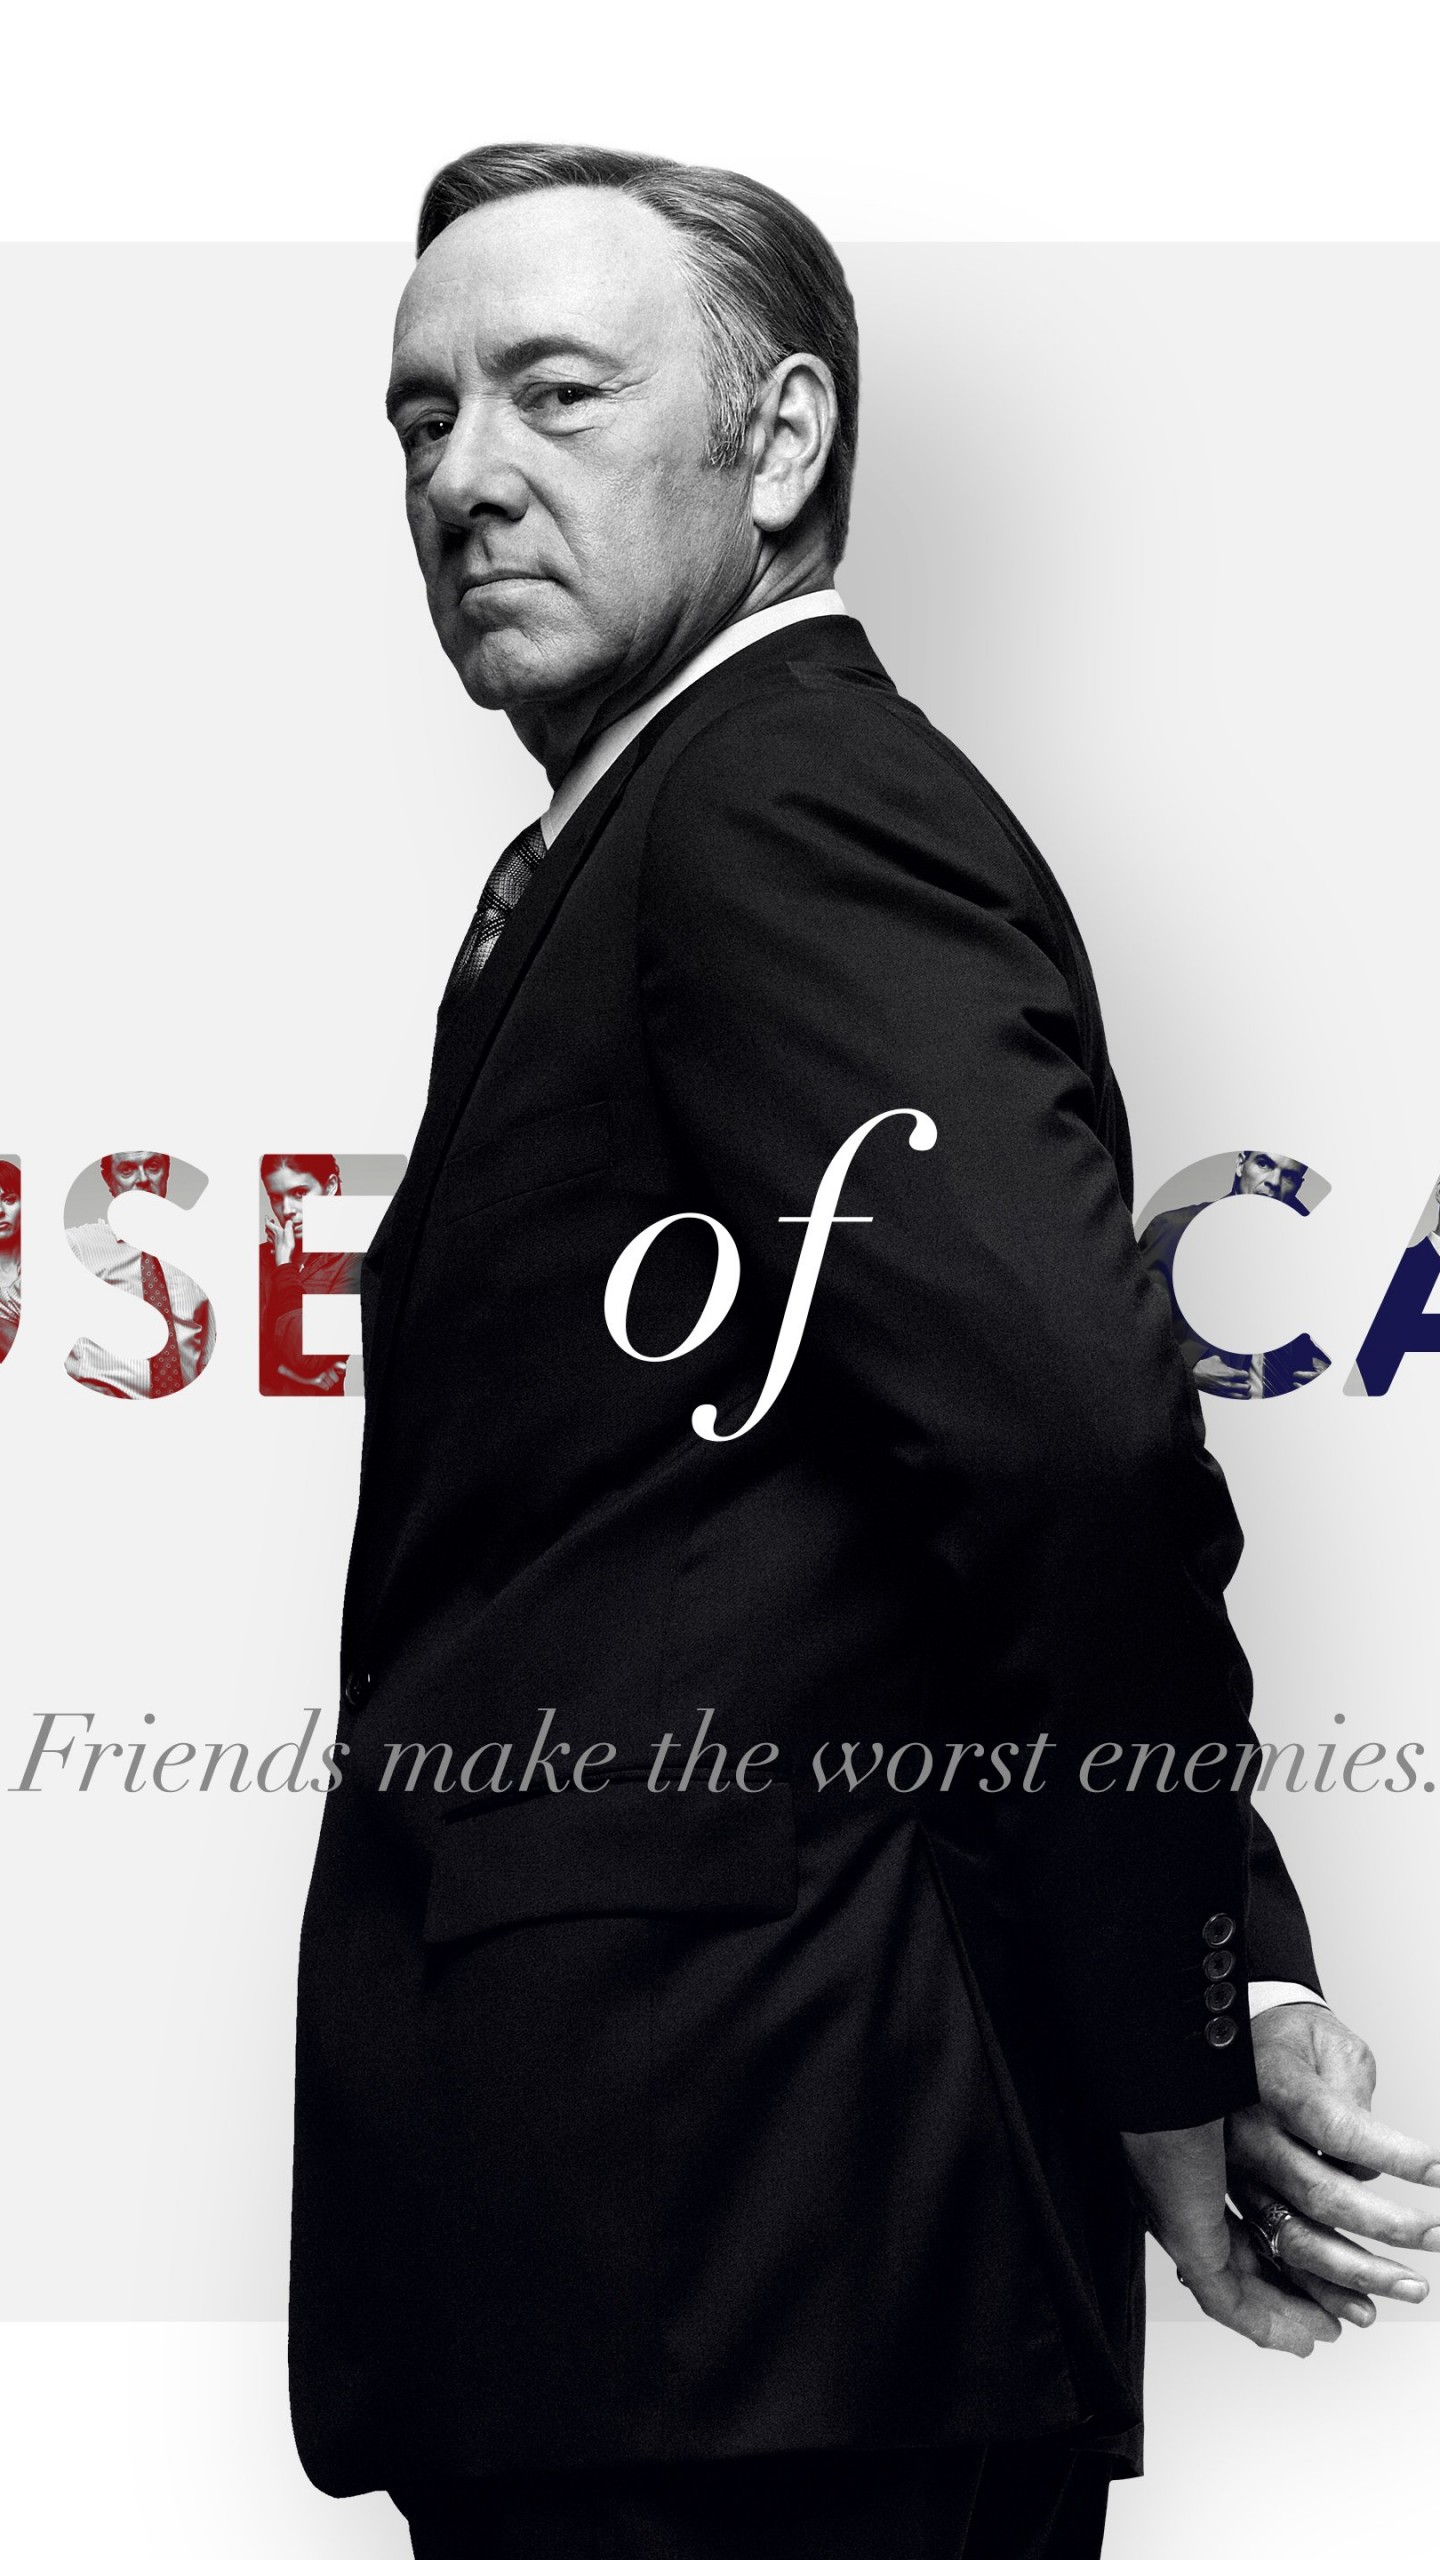 Frank Underwood - House of Cards Wallpaper for LG G3